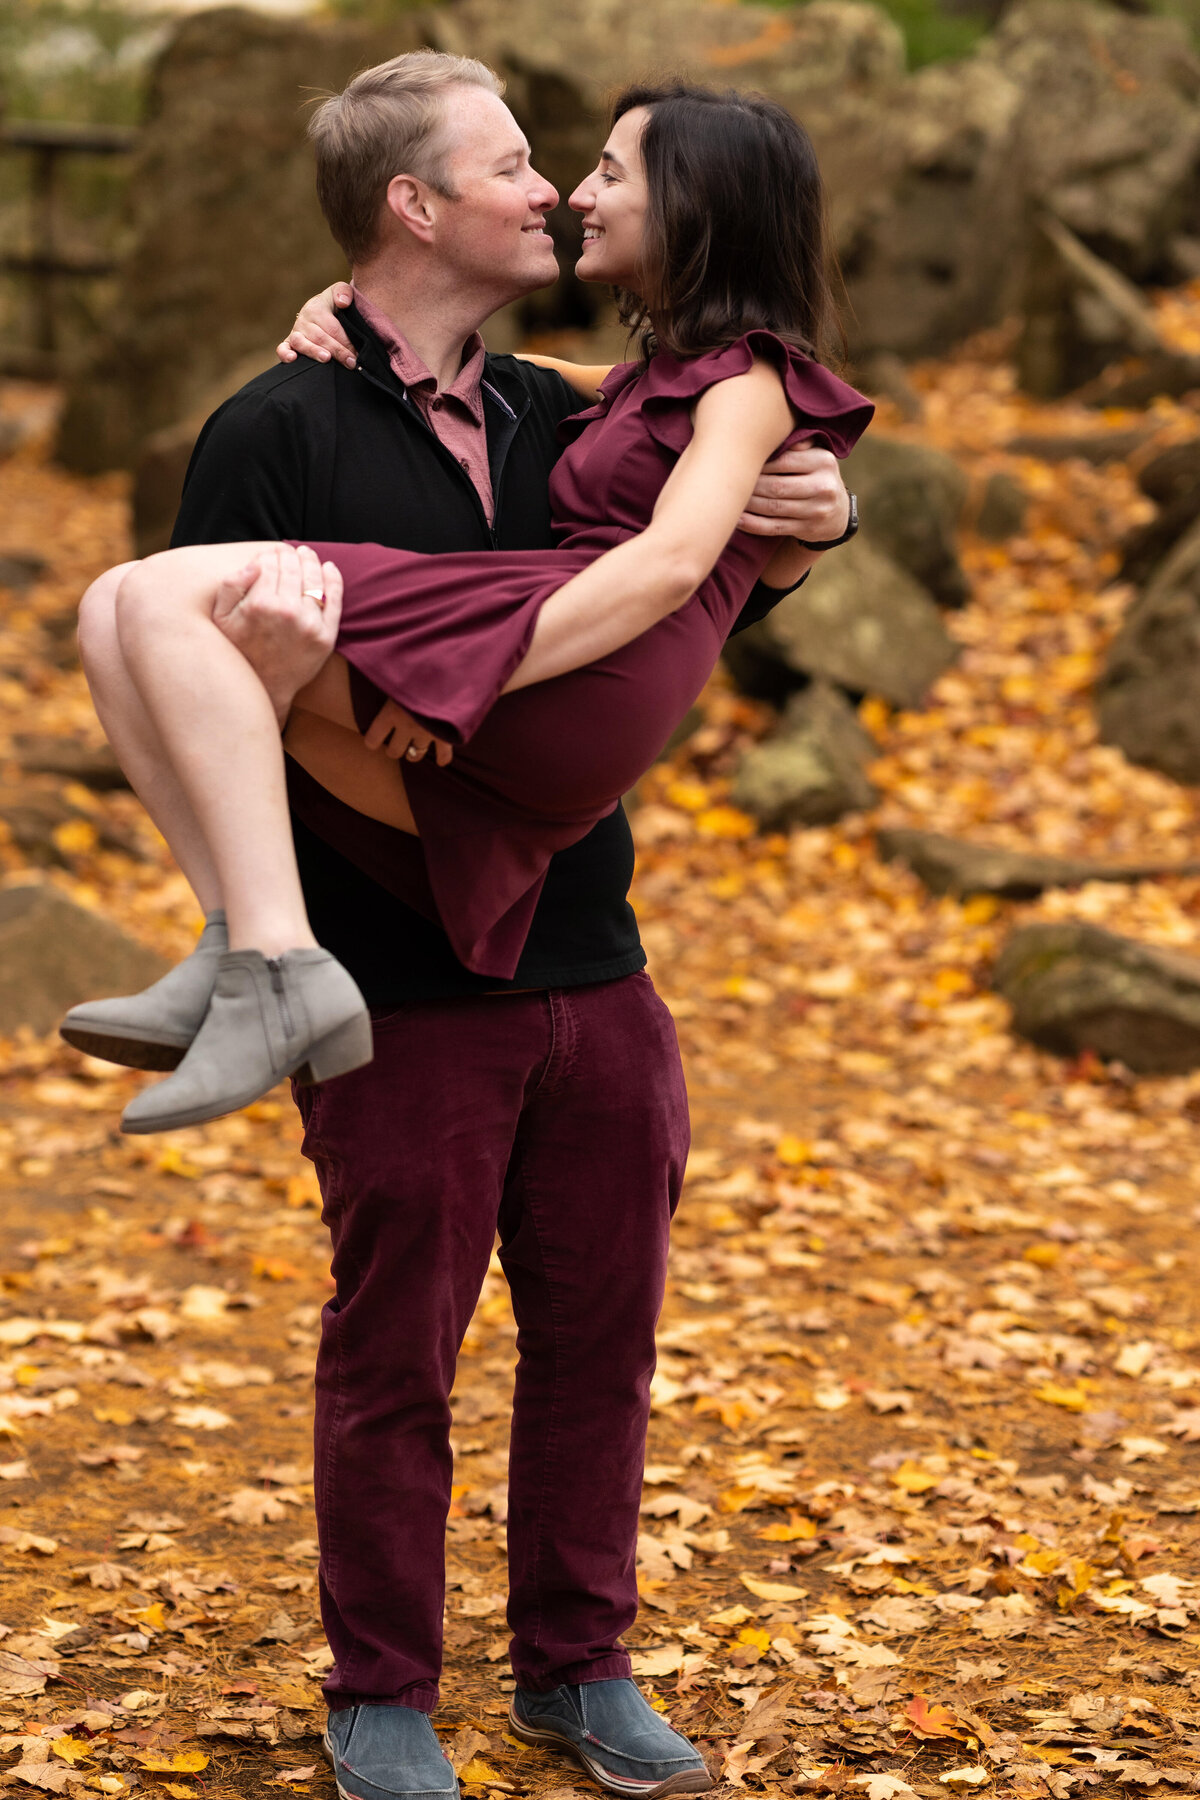 Annalyse and Brent - Minnesota Engagement Photography - Taylor's Falls - Sunrise Engagement Photos - RKH Images (131 of 408)